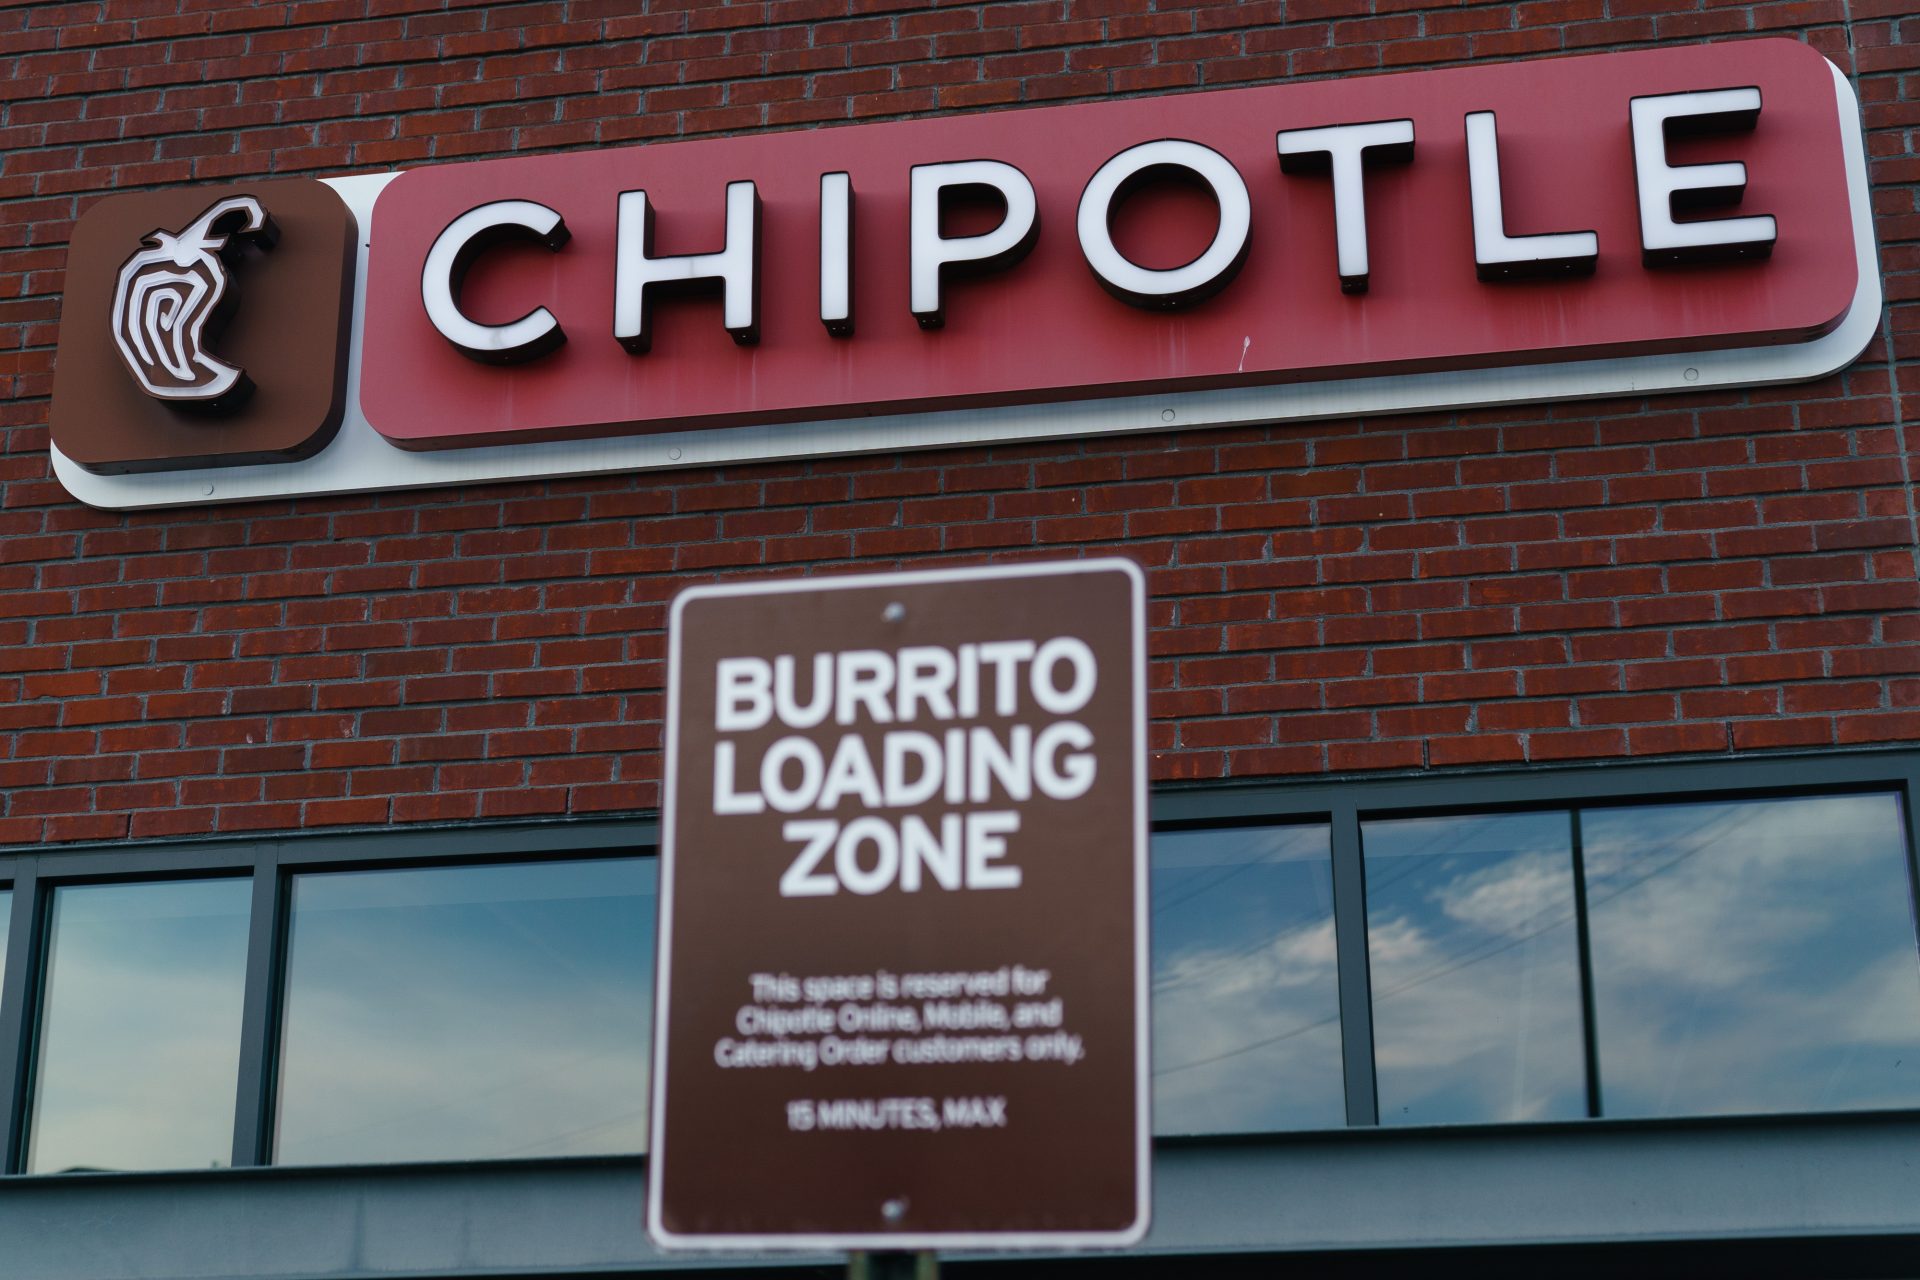 Chipotle Ordered To Pay $20 Million To Current And Former NYC Employees For Violating City Labor Laws